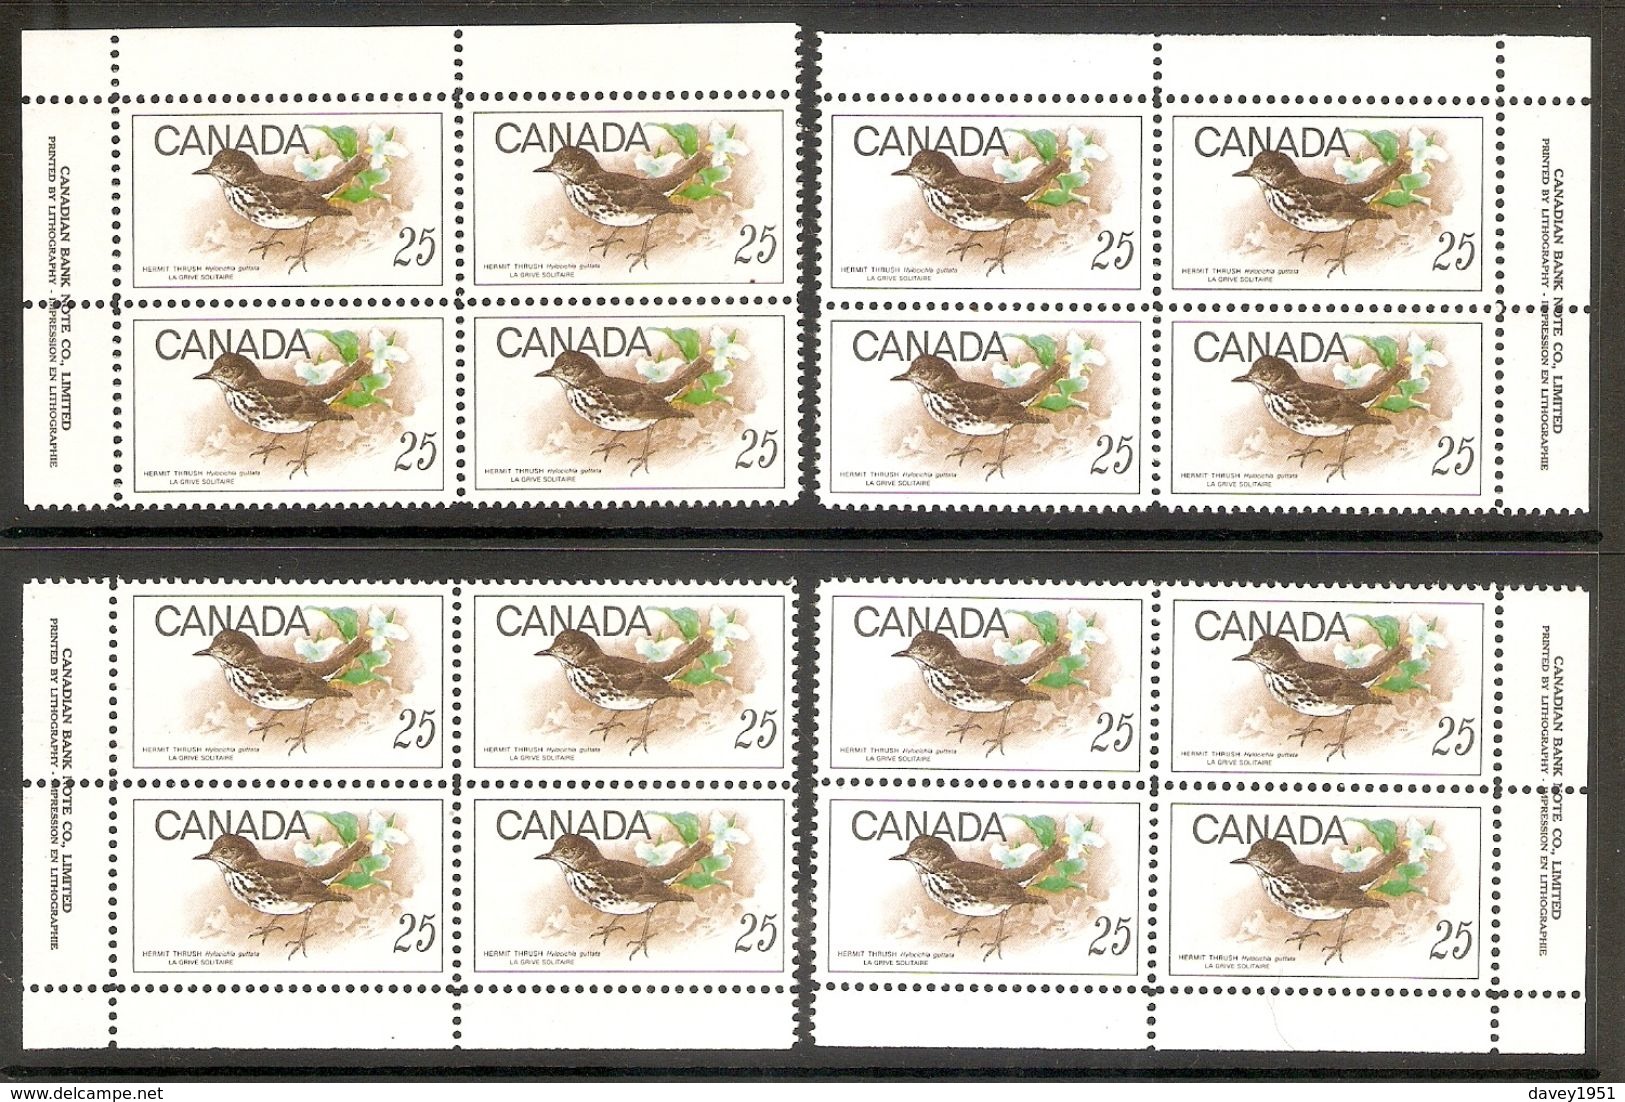 001486 Canada 1969 Birds Set Of Plate Blocks MNH ( 3 Scans) - Plate Number & Inscriptions